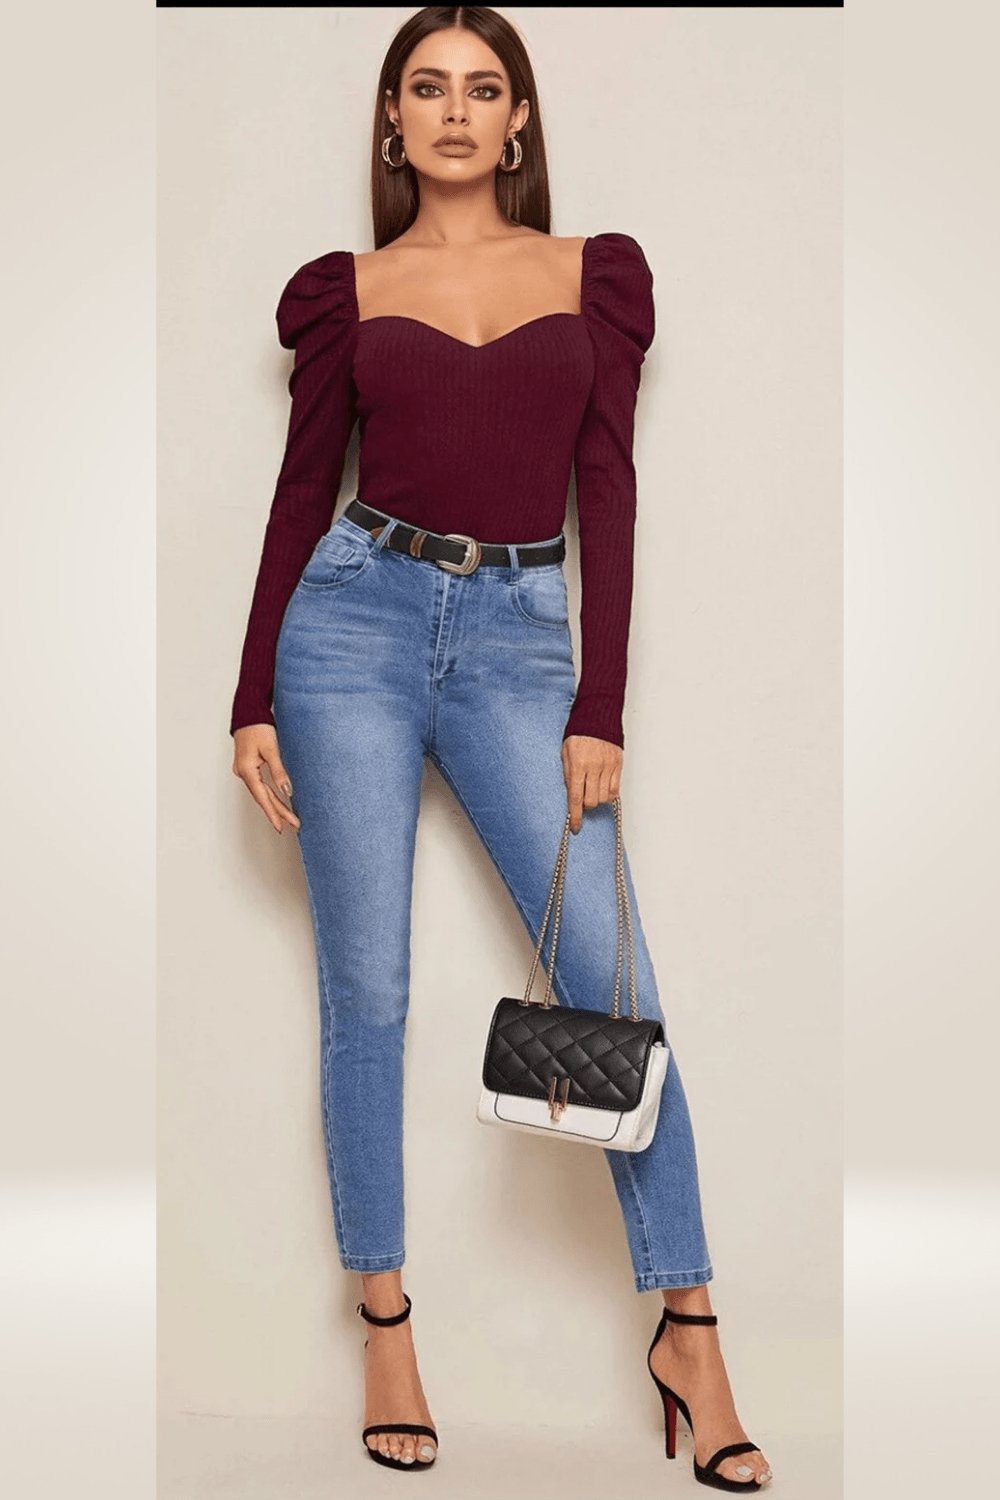 Bustier Fit Long Puff Sleeve Top - TGC Boutique - Top